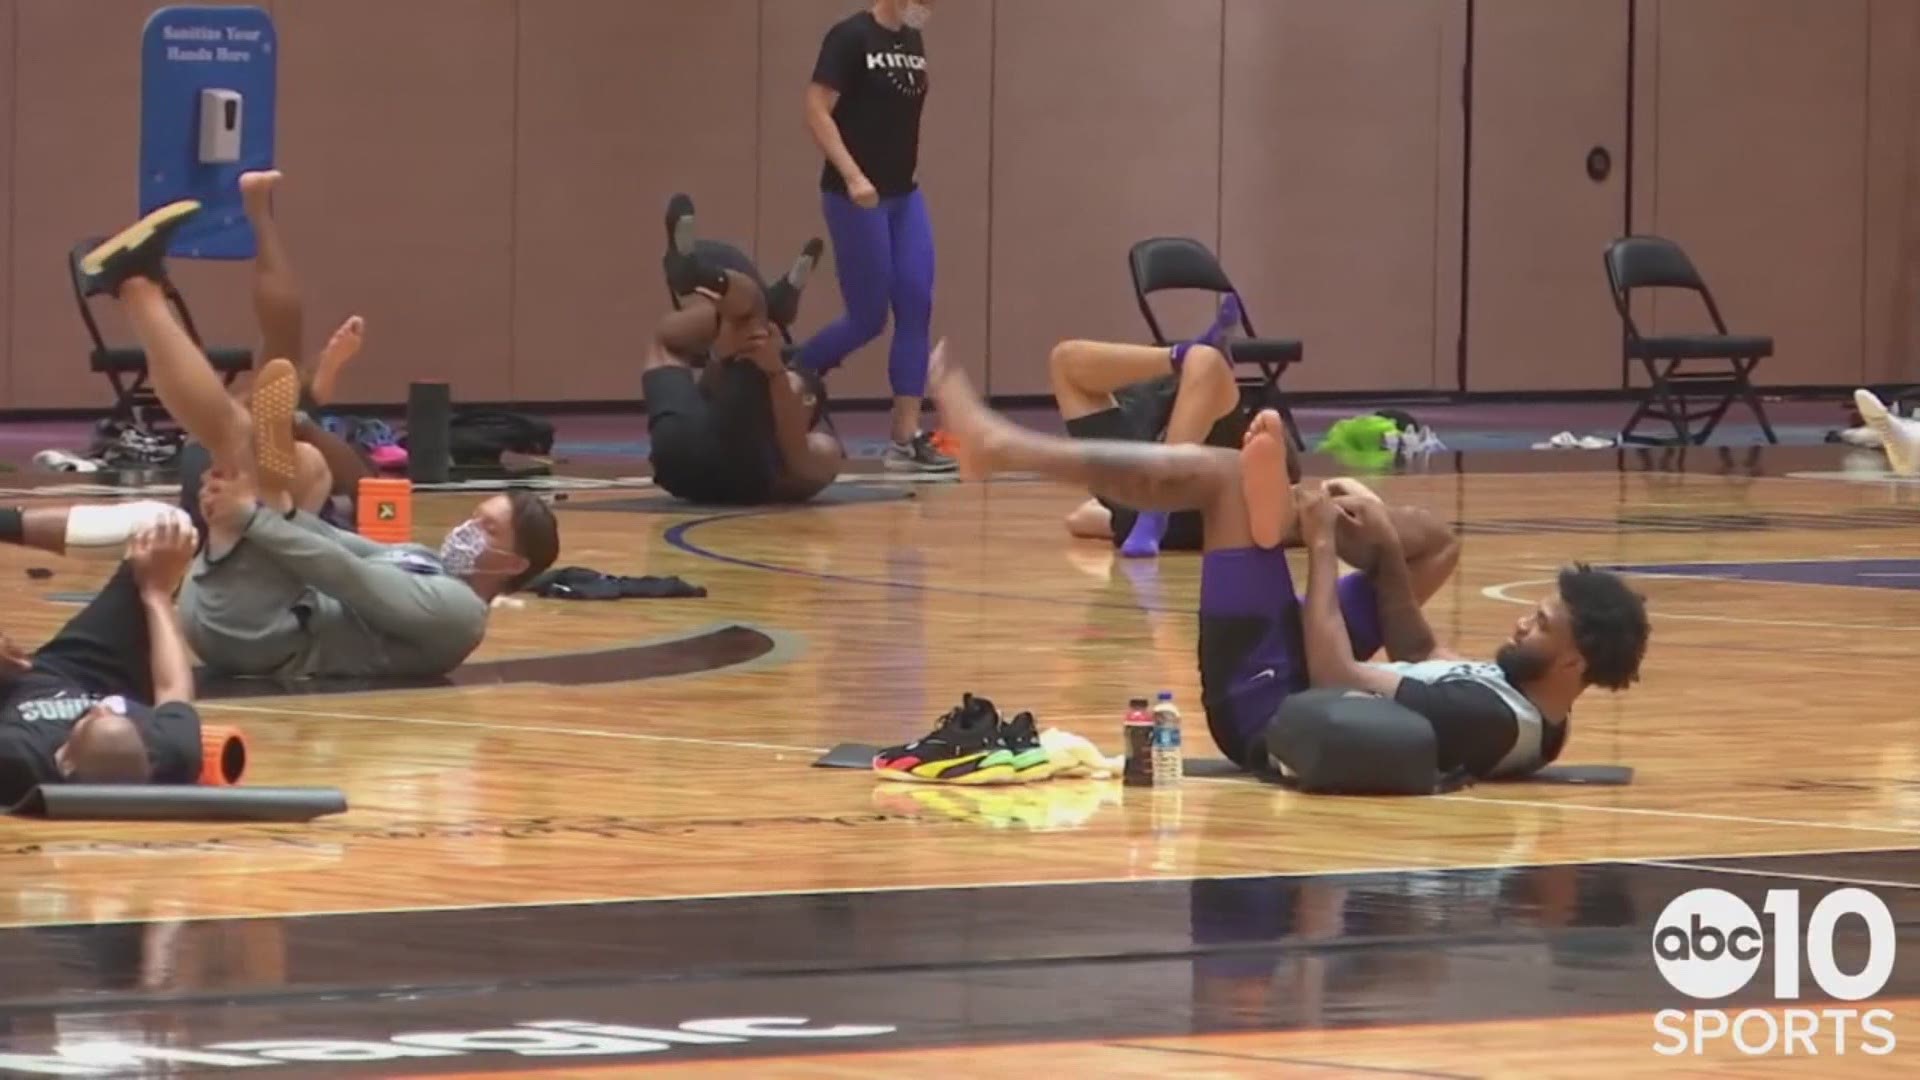 Inside Wednesday's practice with the Sacramento Kings from the NBA's bubble environment at Walt Disney World Resorts in Orlando. (VIDEO: NBA/KINGS)